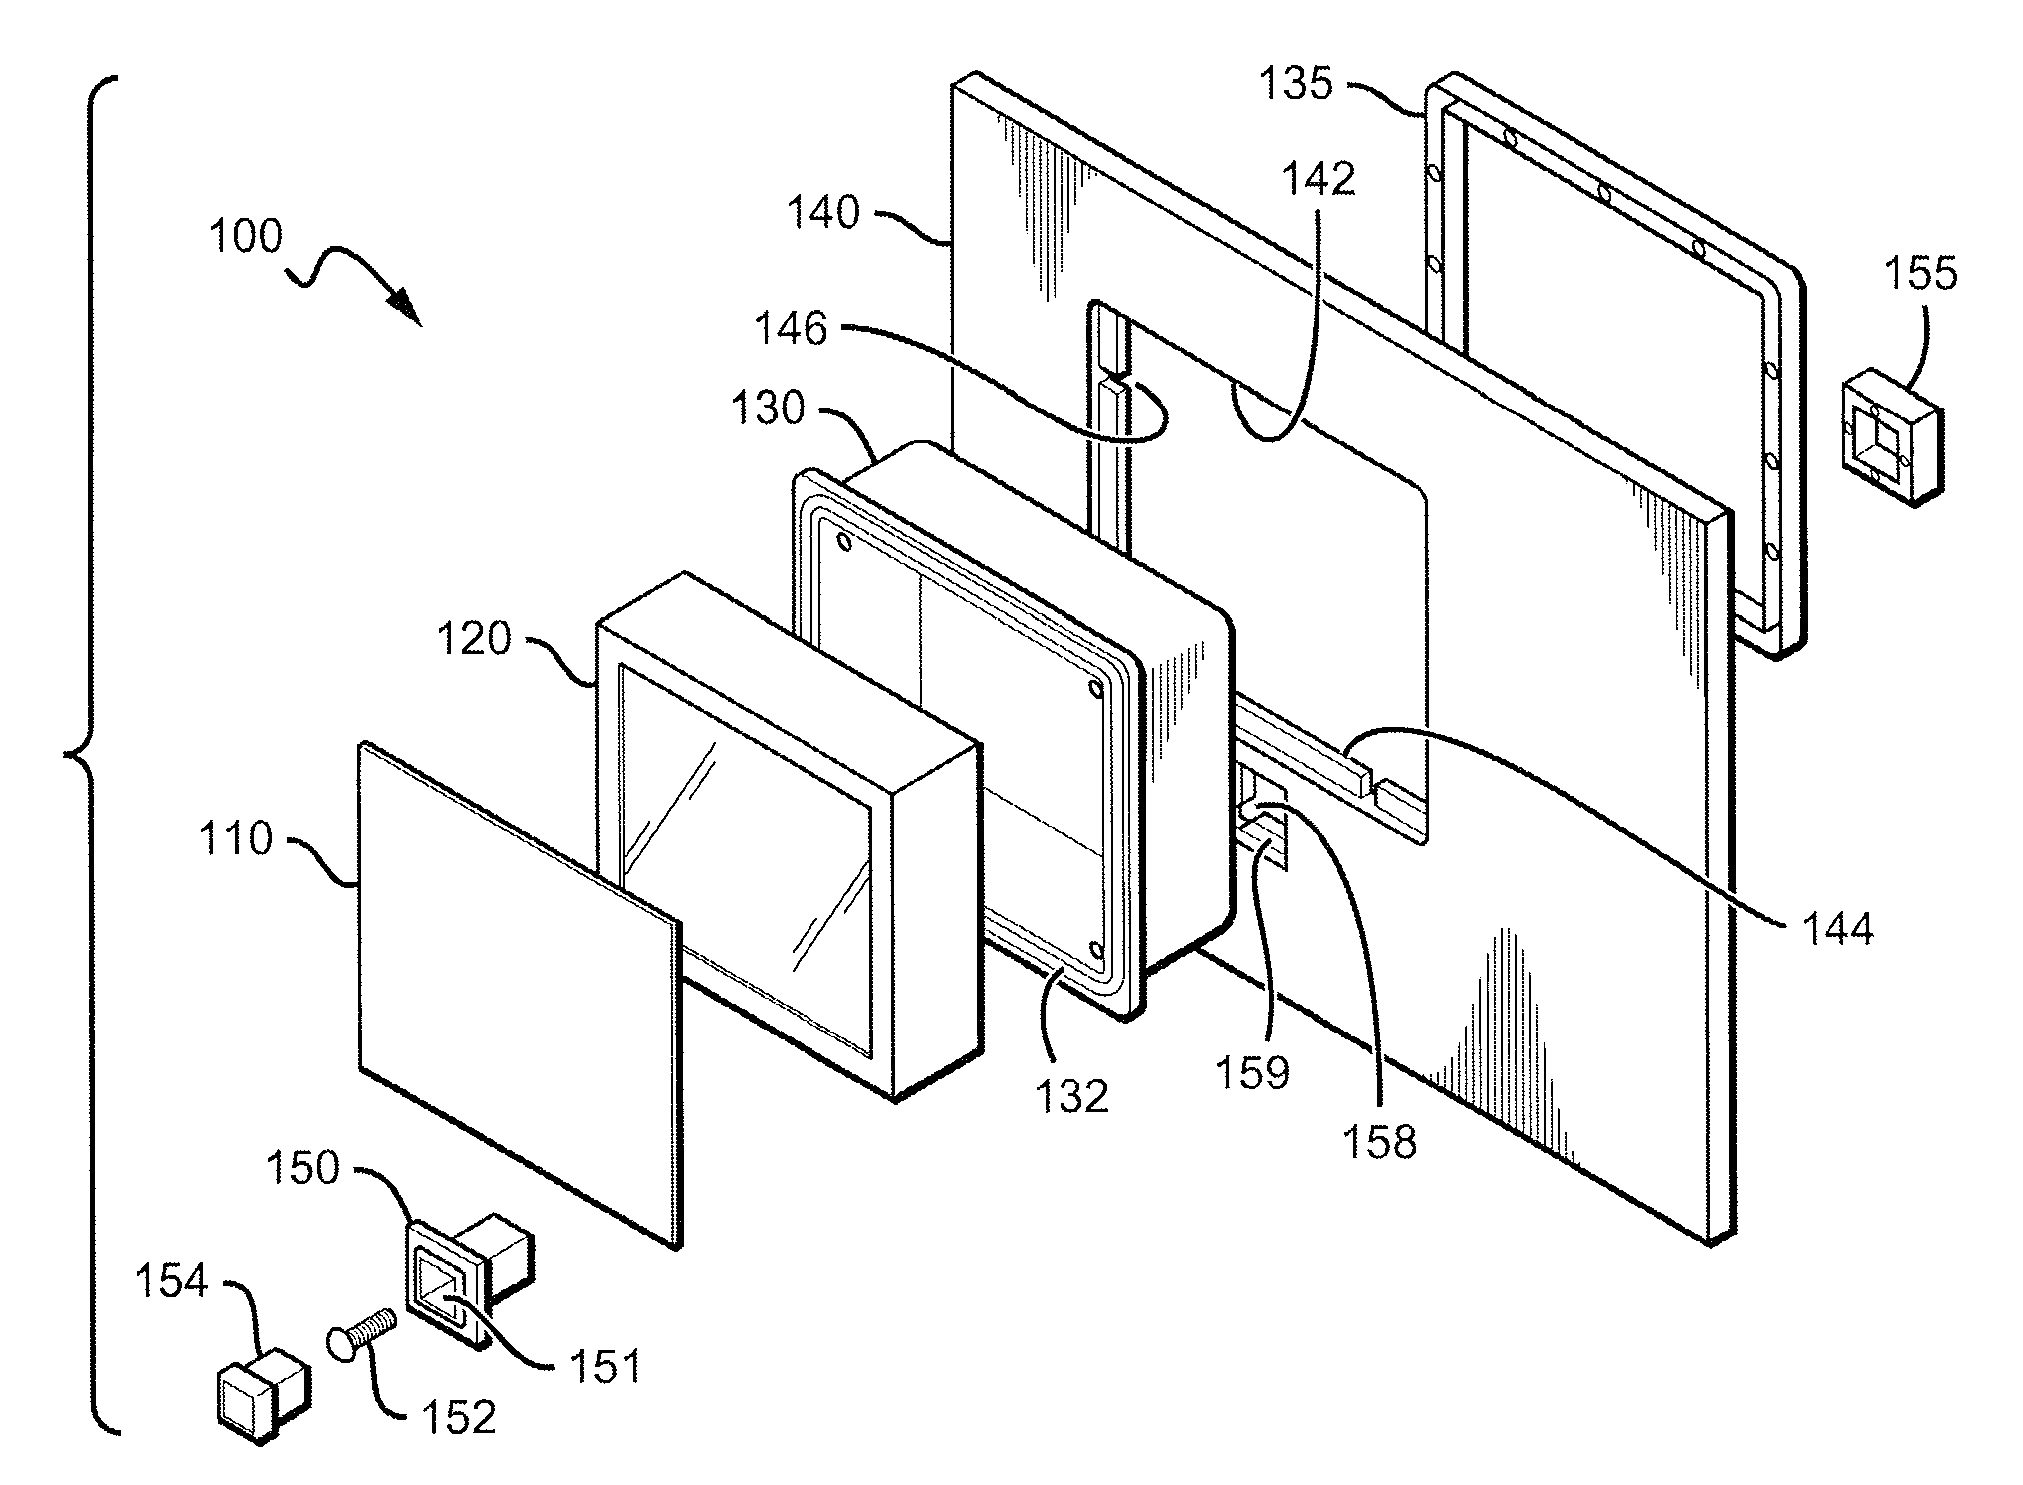 Flush mounting apparatus and methods using component cover